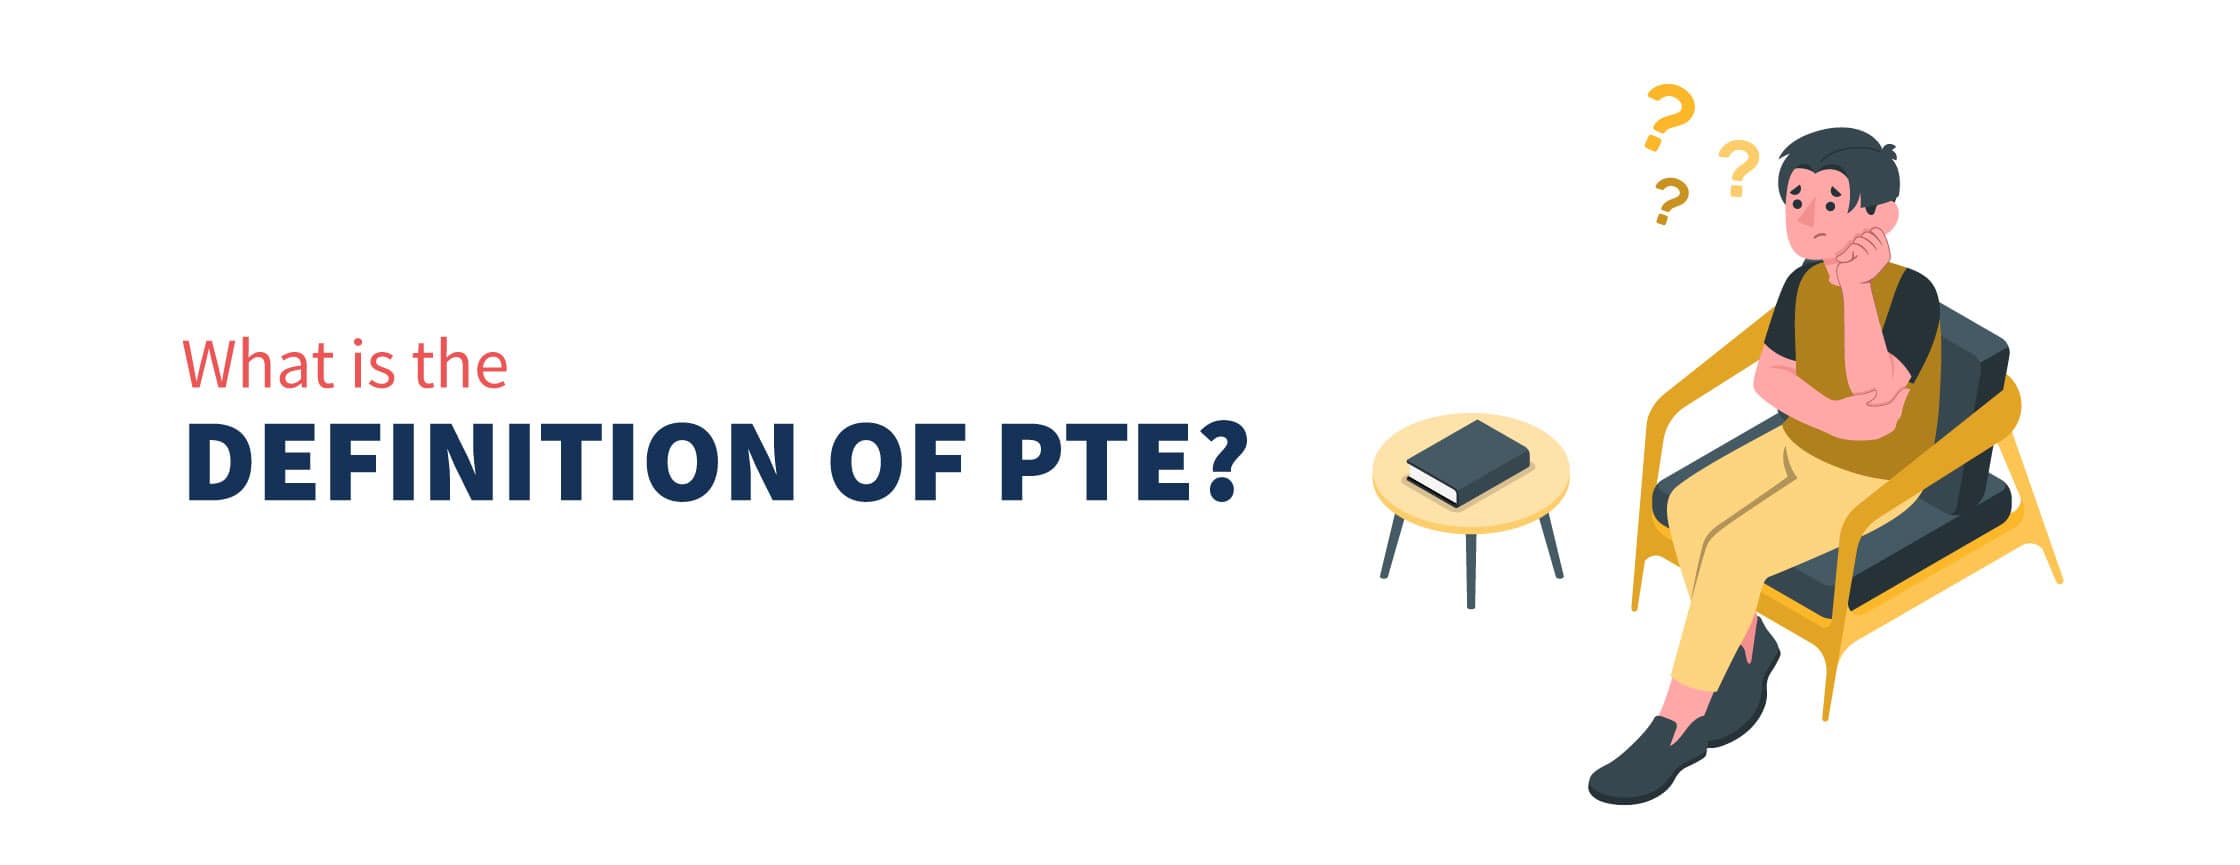 What is the Definition of PTE?